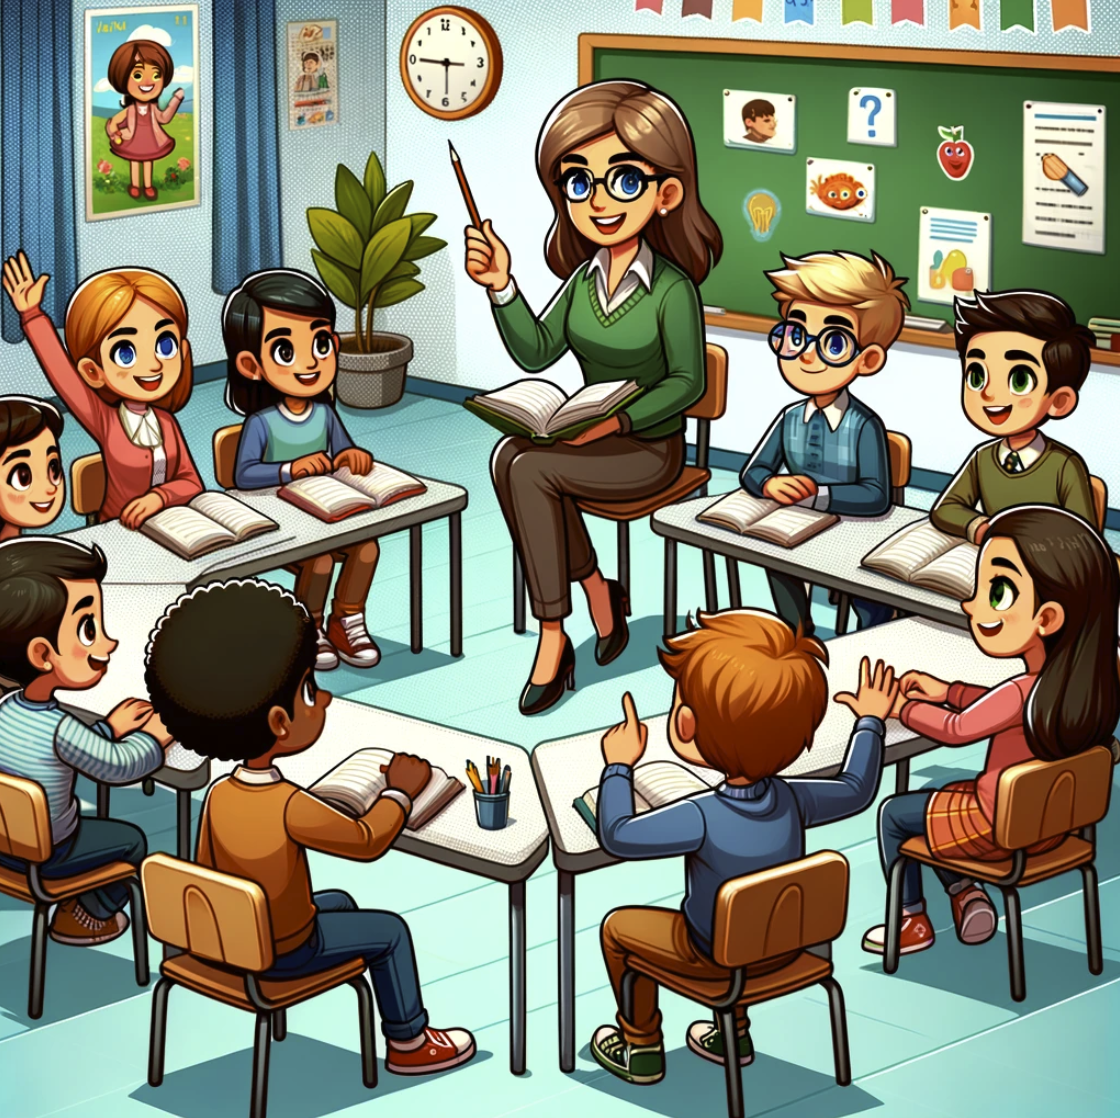 image illustrating the Harkness Table method, showcasing a diverse group of students engaged in a lively discussion around an oval-shaped table, with the teacher facilitating the conversation in a collaborative and inclusive environment